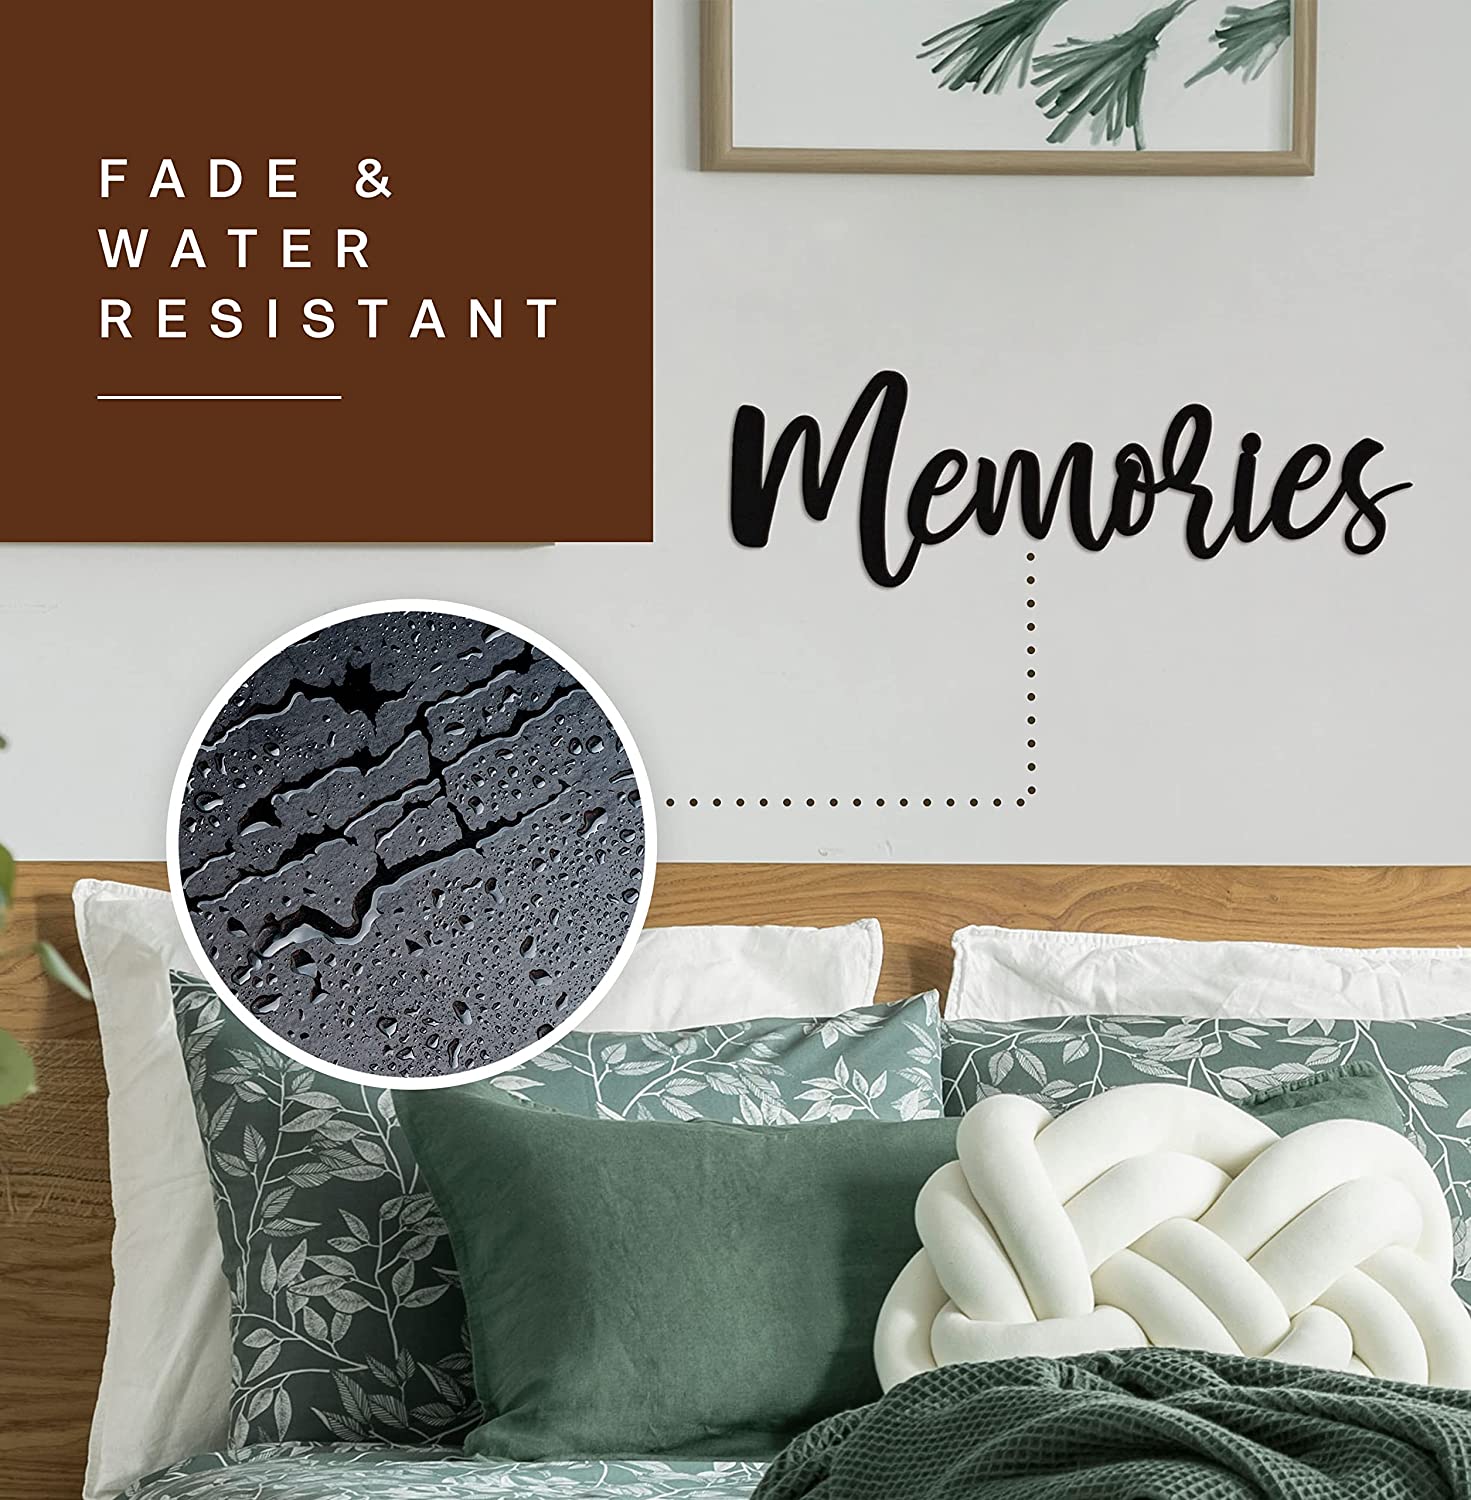 Memories Wall Decor Metal Art Piece - 17"X5" Memories Sign Metal Cut Out Signs From Durable Powder-Coated Metal